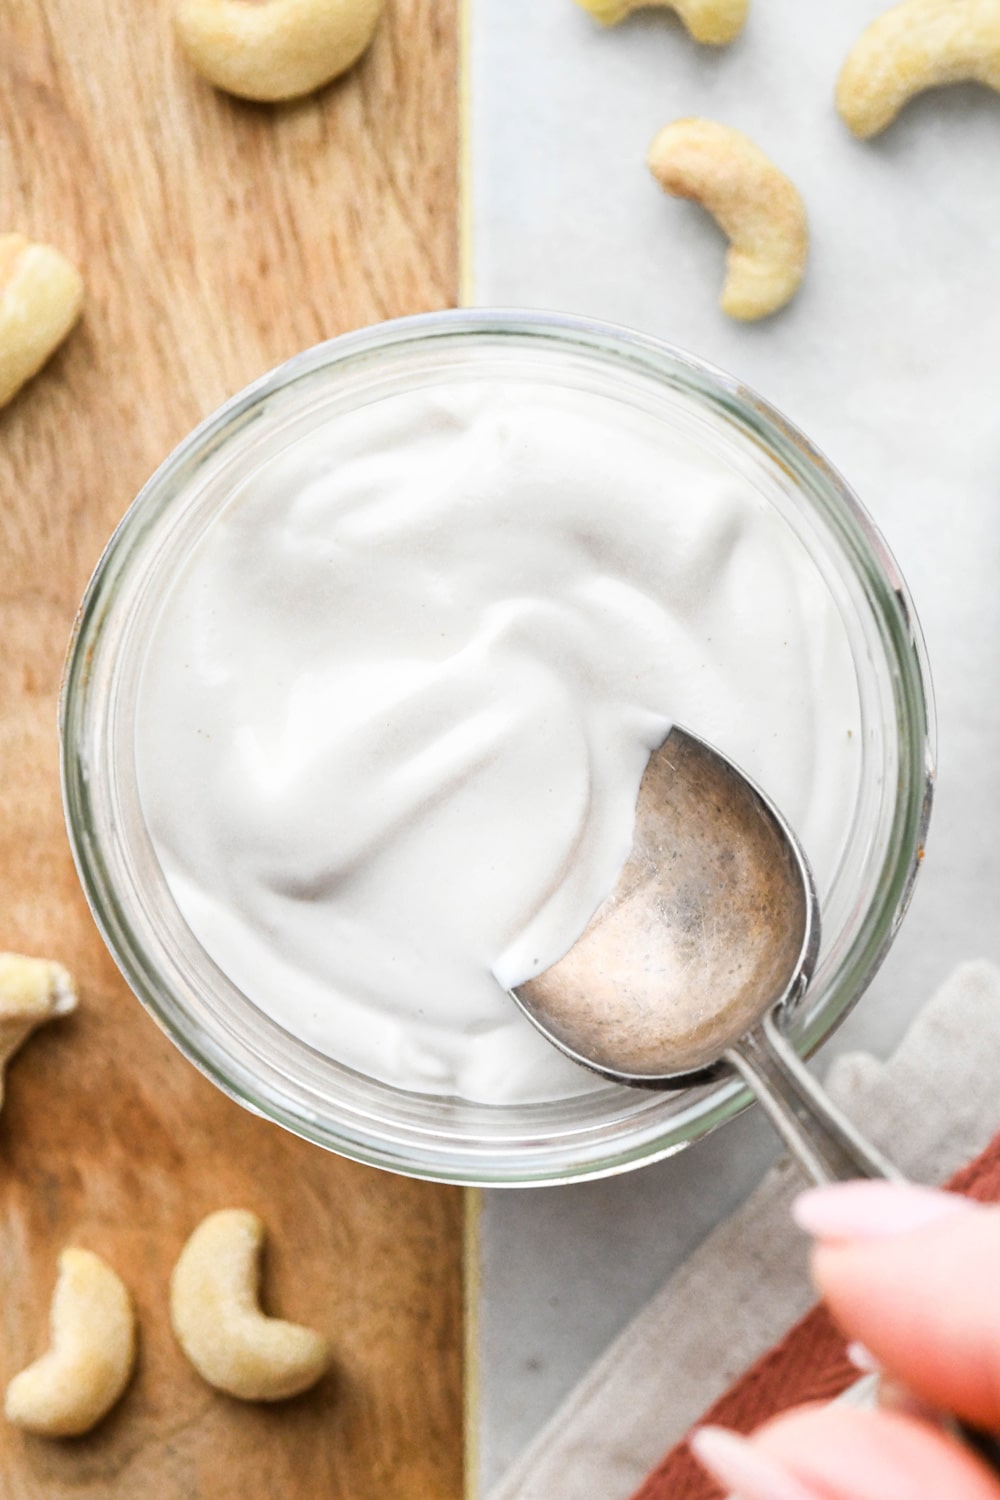 Blended cashew cream in a glass jar from the overhead perspective, with a spoon dipping into the jar to show the thick and creamy texture.